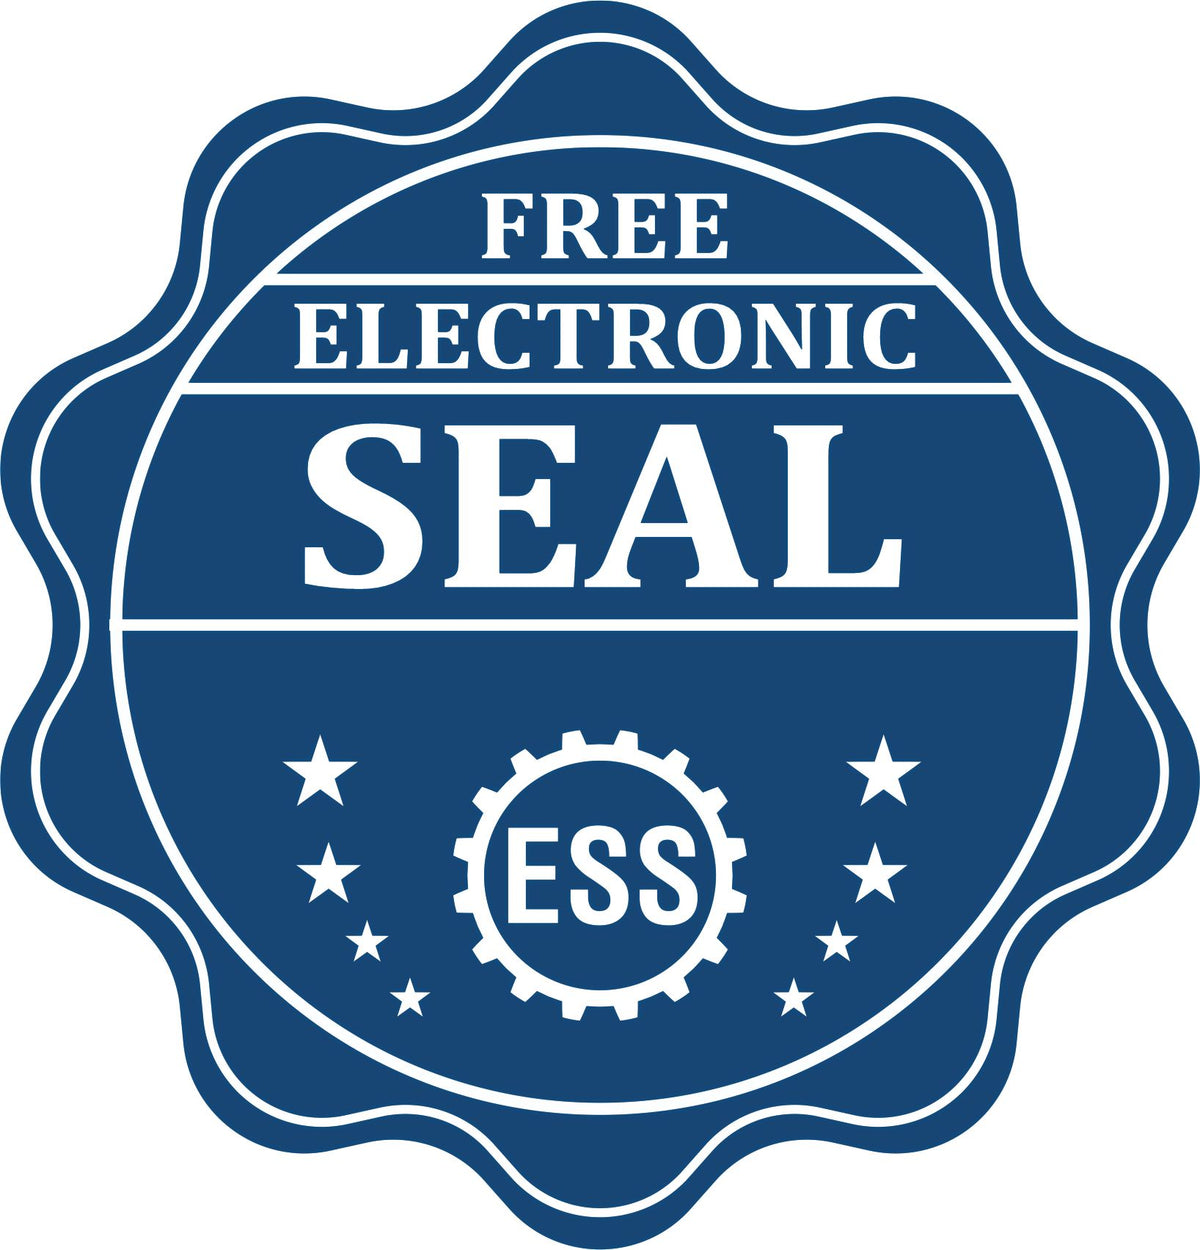 A badge showing a free electronic seal for the South Carolina Geologist Desk Seal with stars and the ESS gear on the emblem.